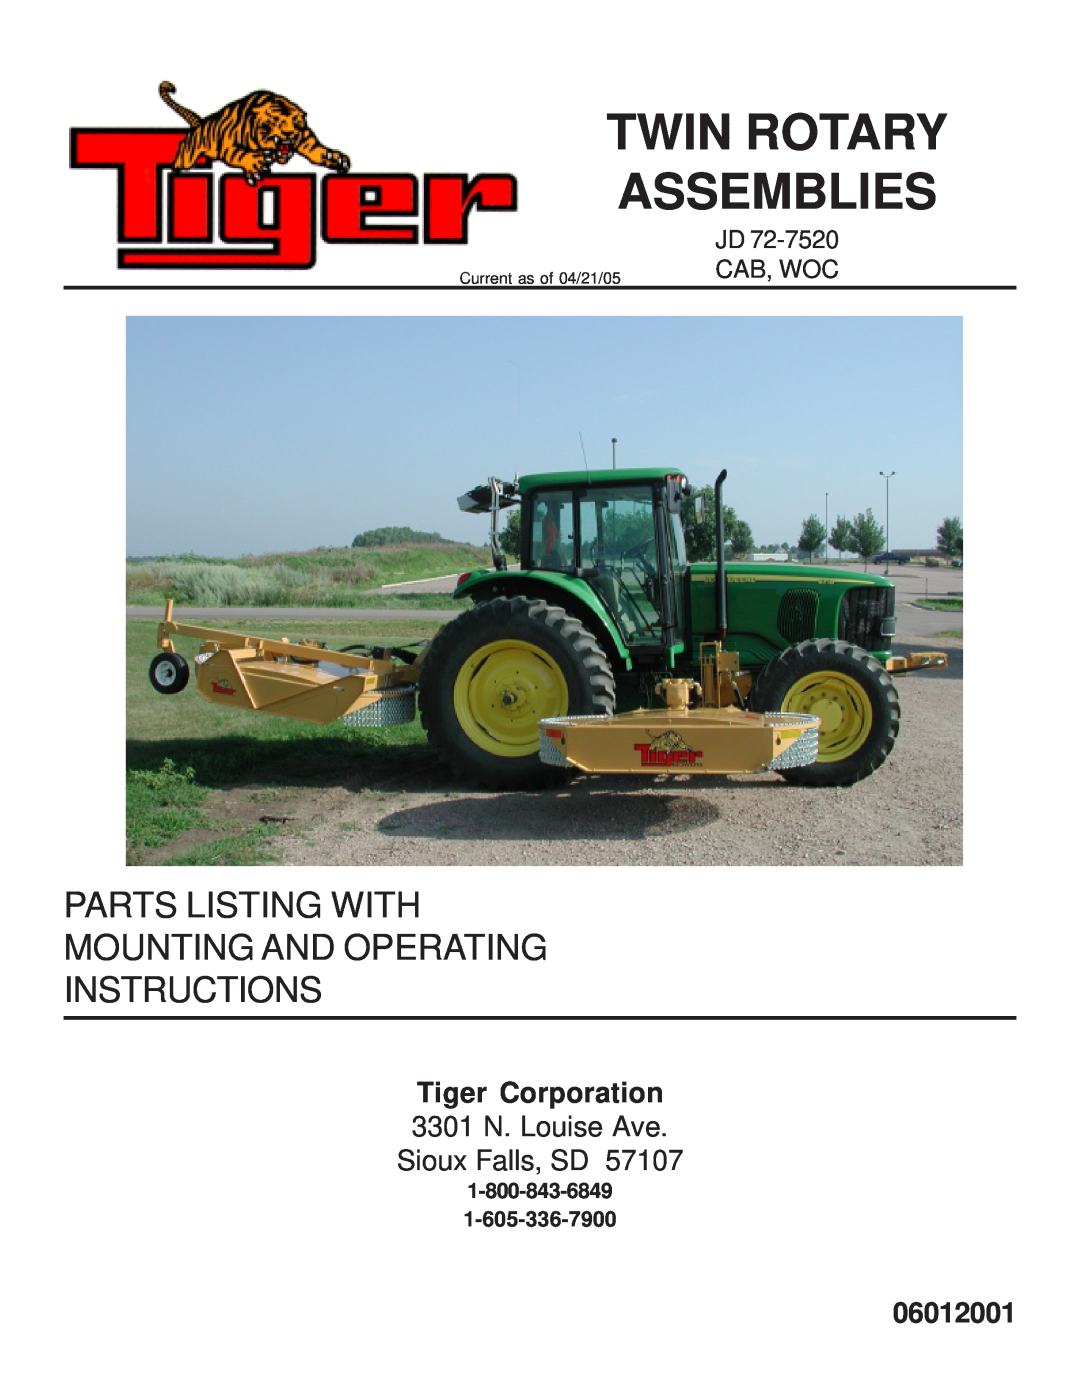 Tiger Products Co., Ltd JD 72-7520 manual Tiger Corporation, 3301 N. Louise Ave Sioux Falls, SD, 06012001 